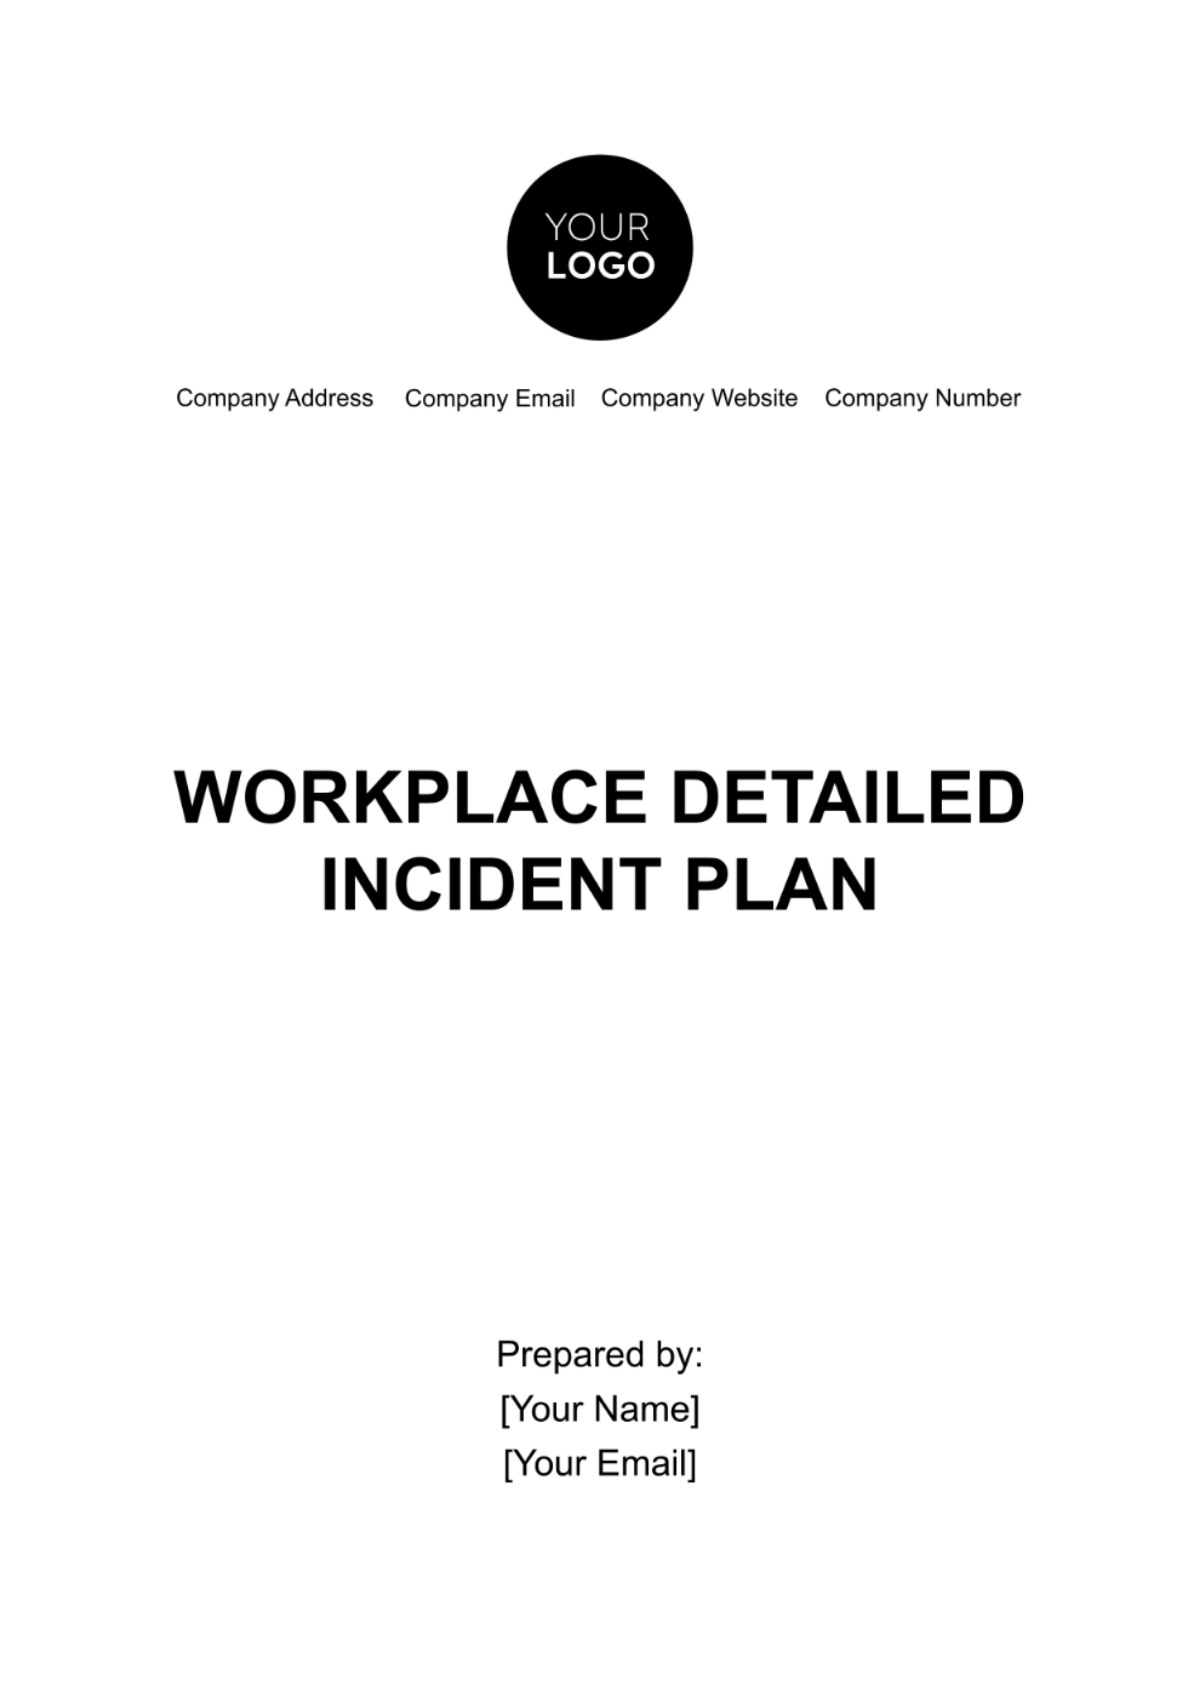 Free Workplace Detailed Incident Plan Template